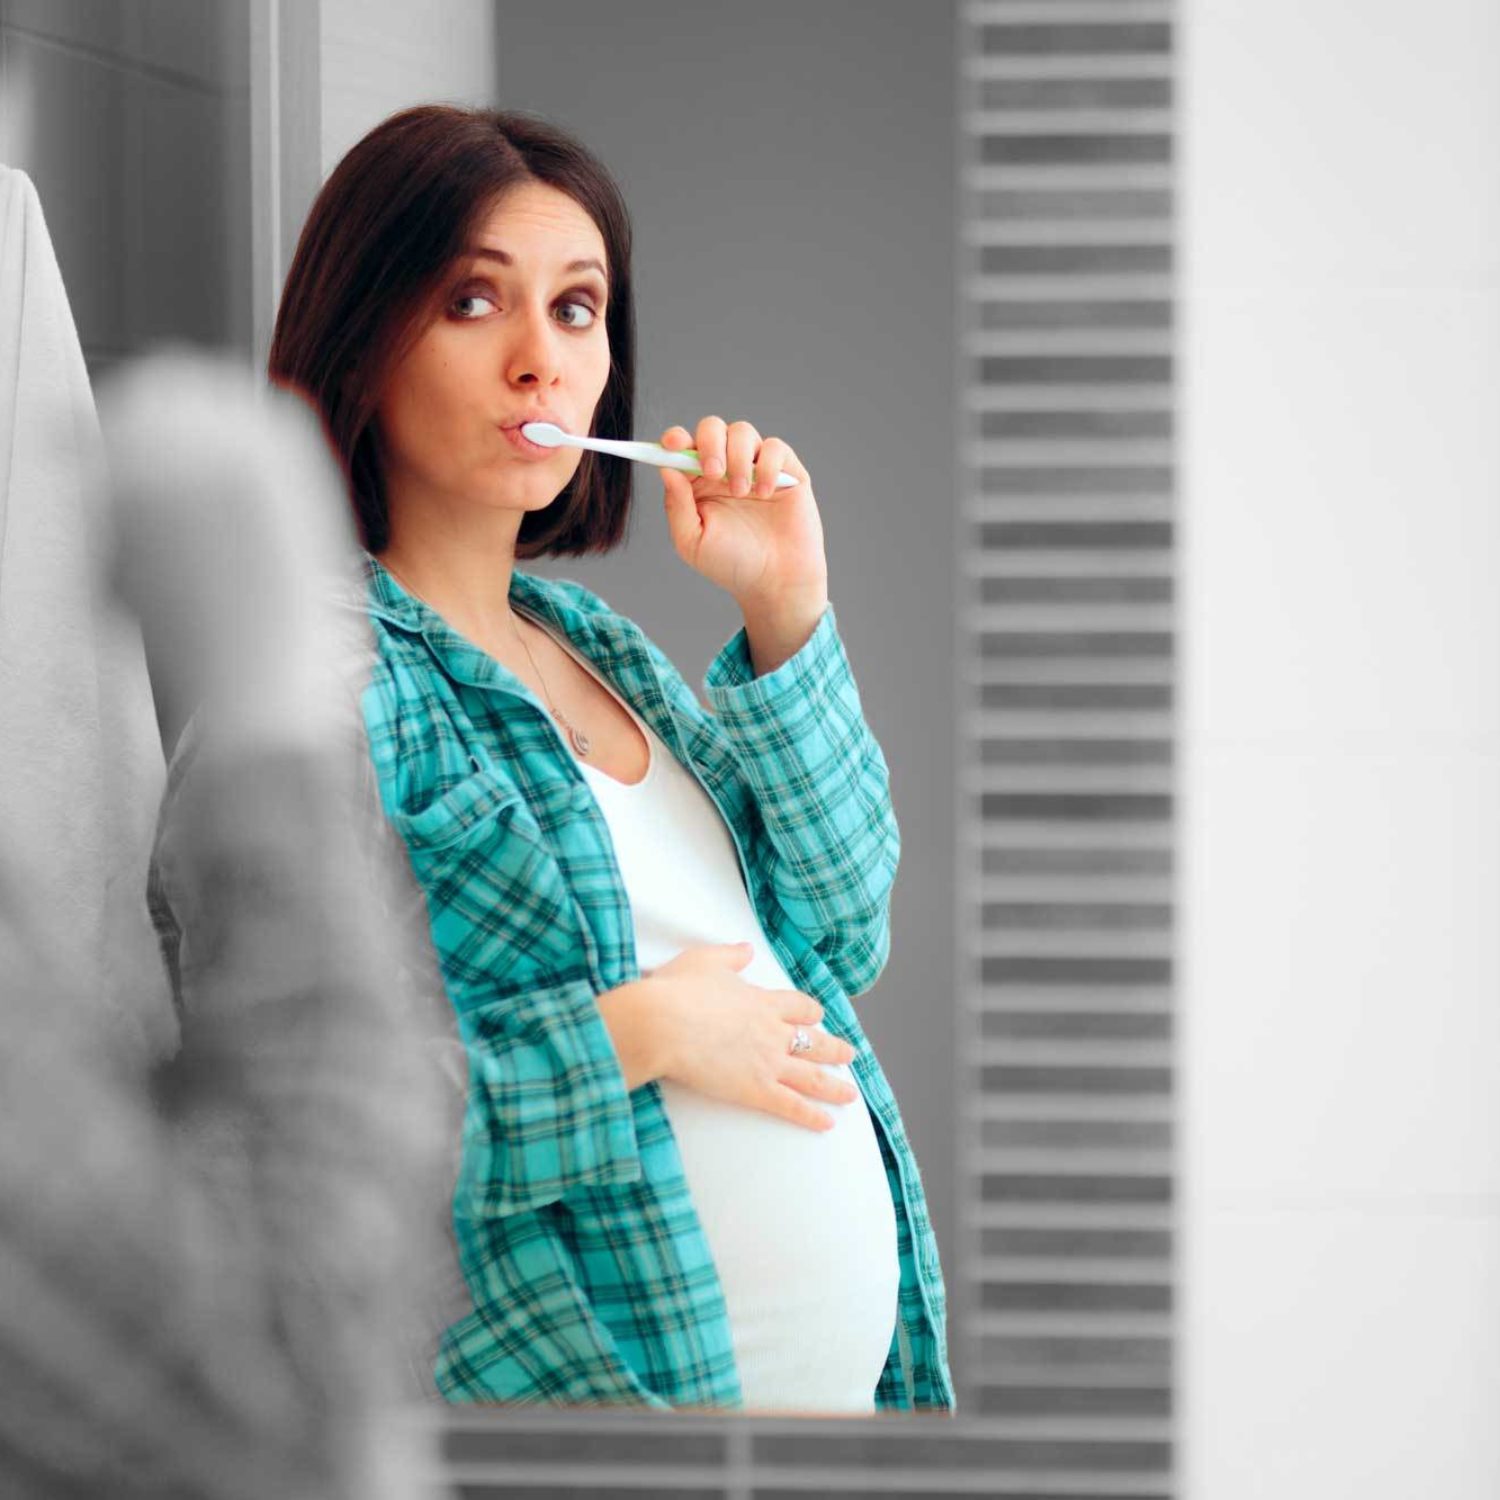 Oral health in pregnancy and things to consider